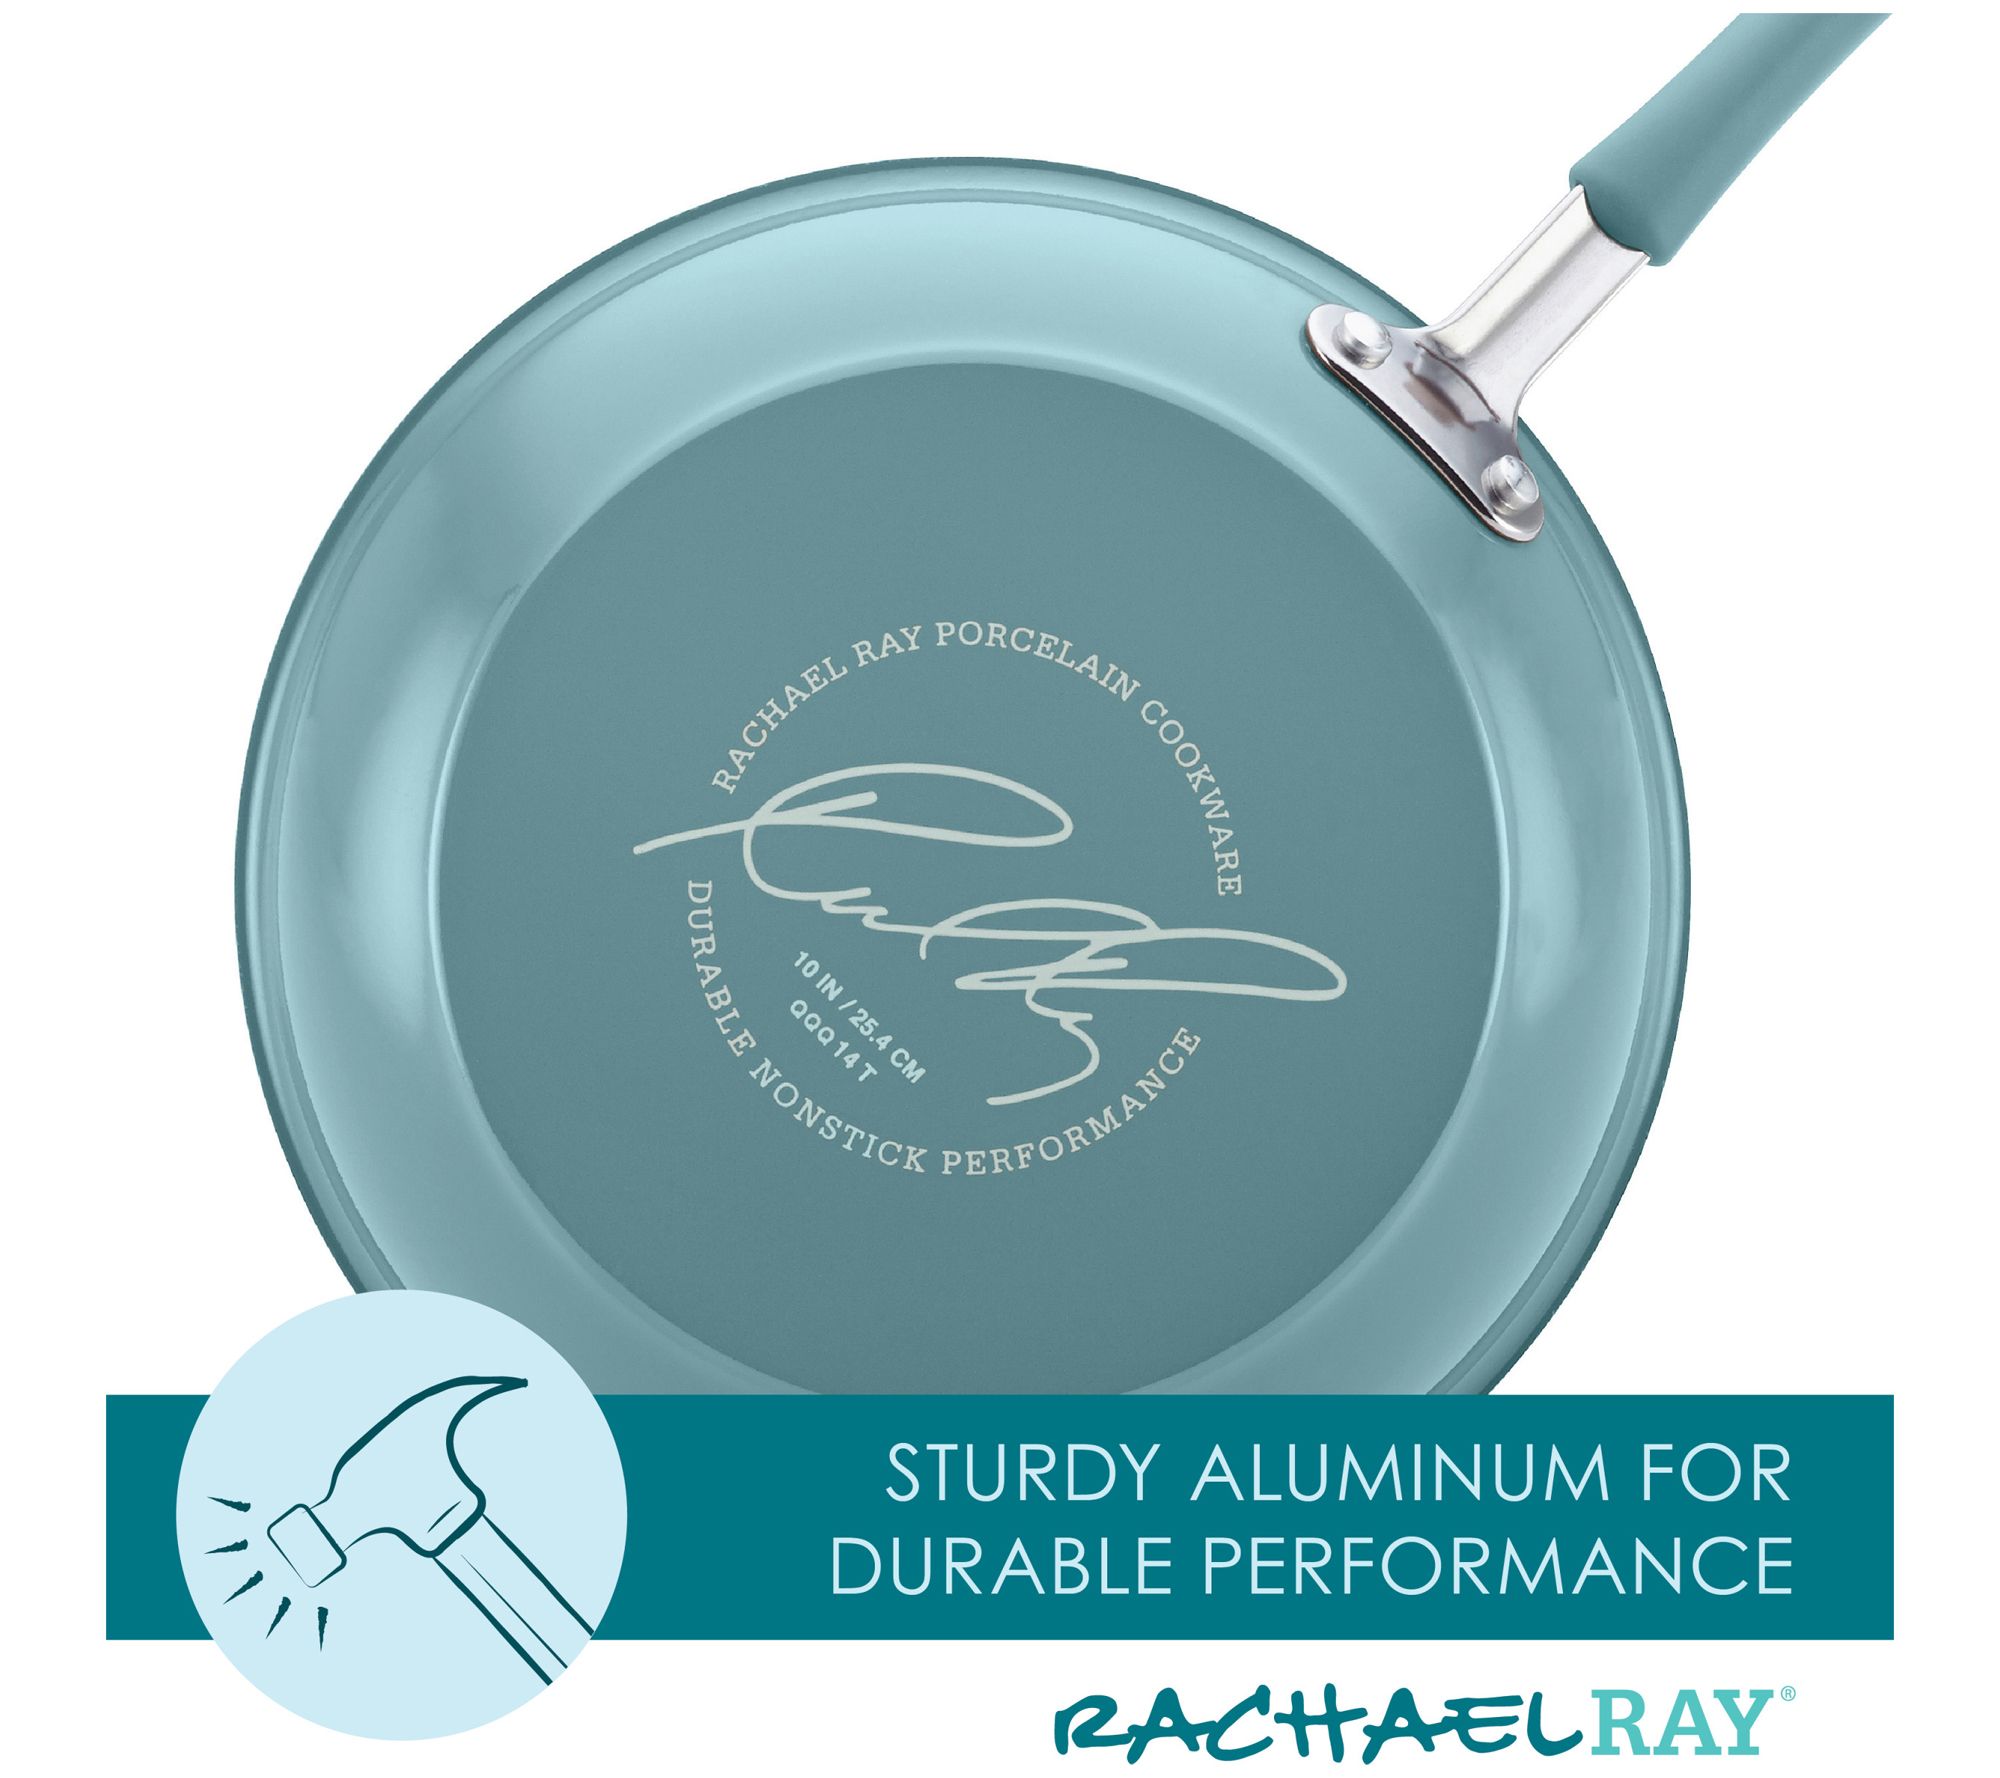 Rachael Ray Create Delicious 13pc Aluminum Nonstick Cookware Set Teal :  Target